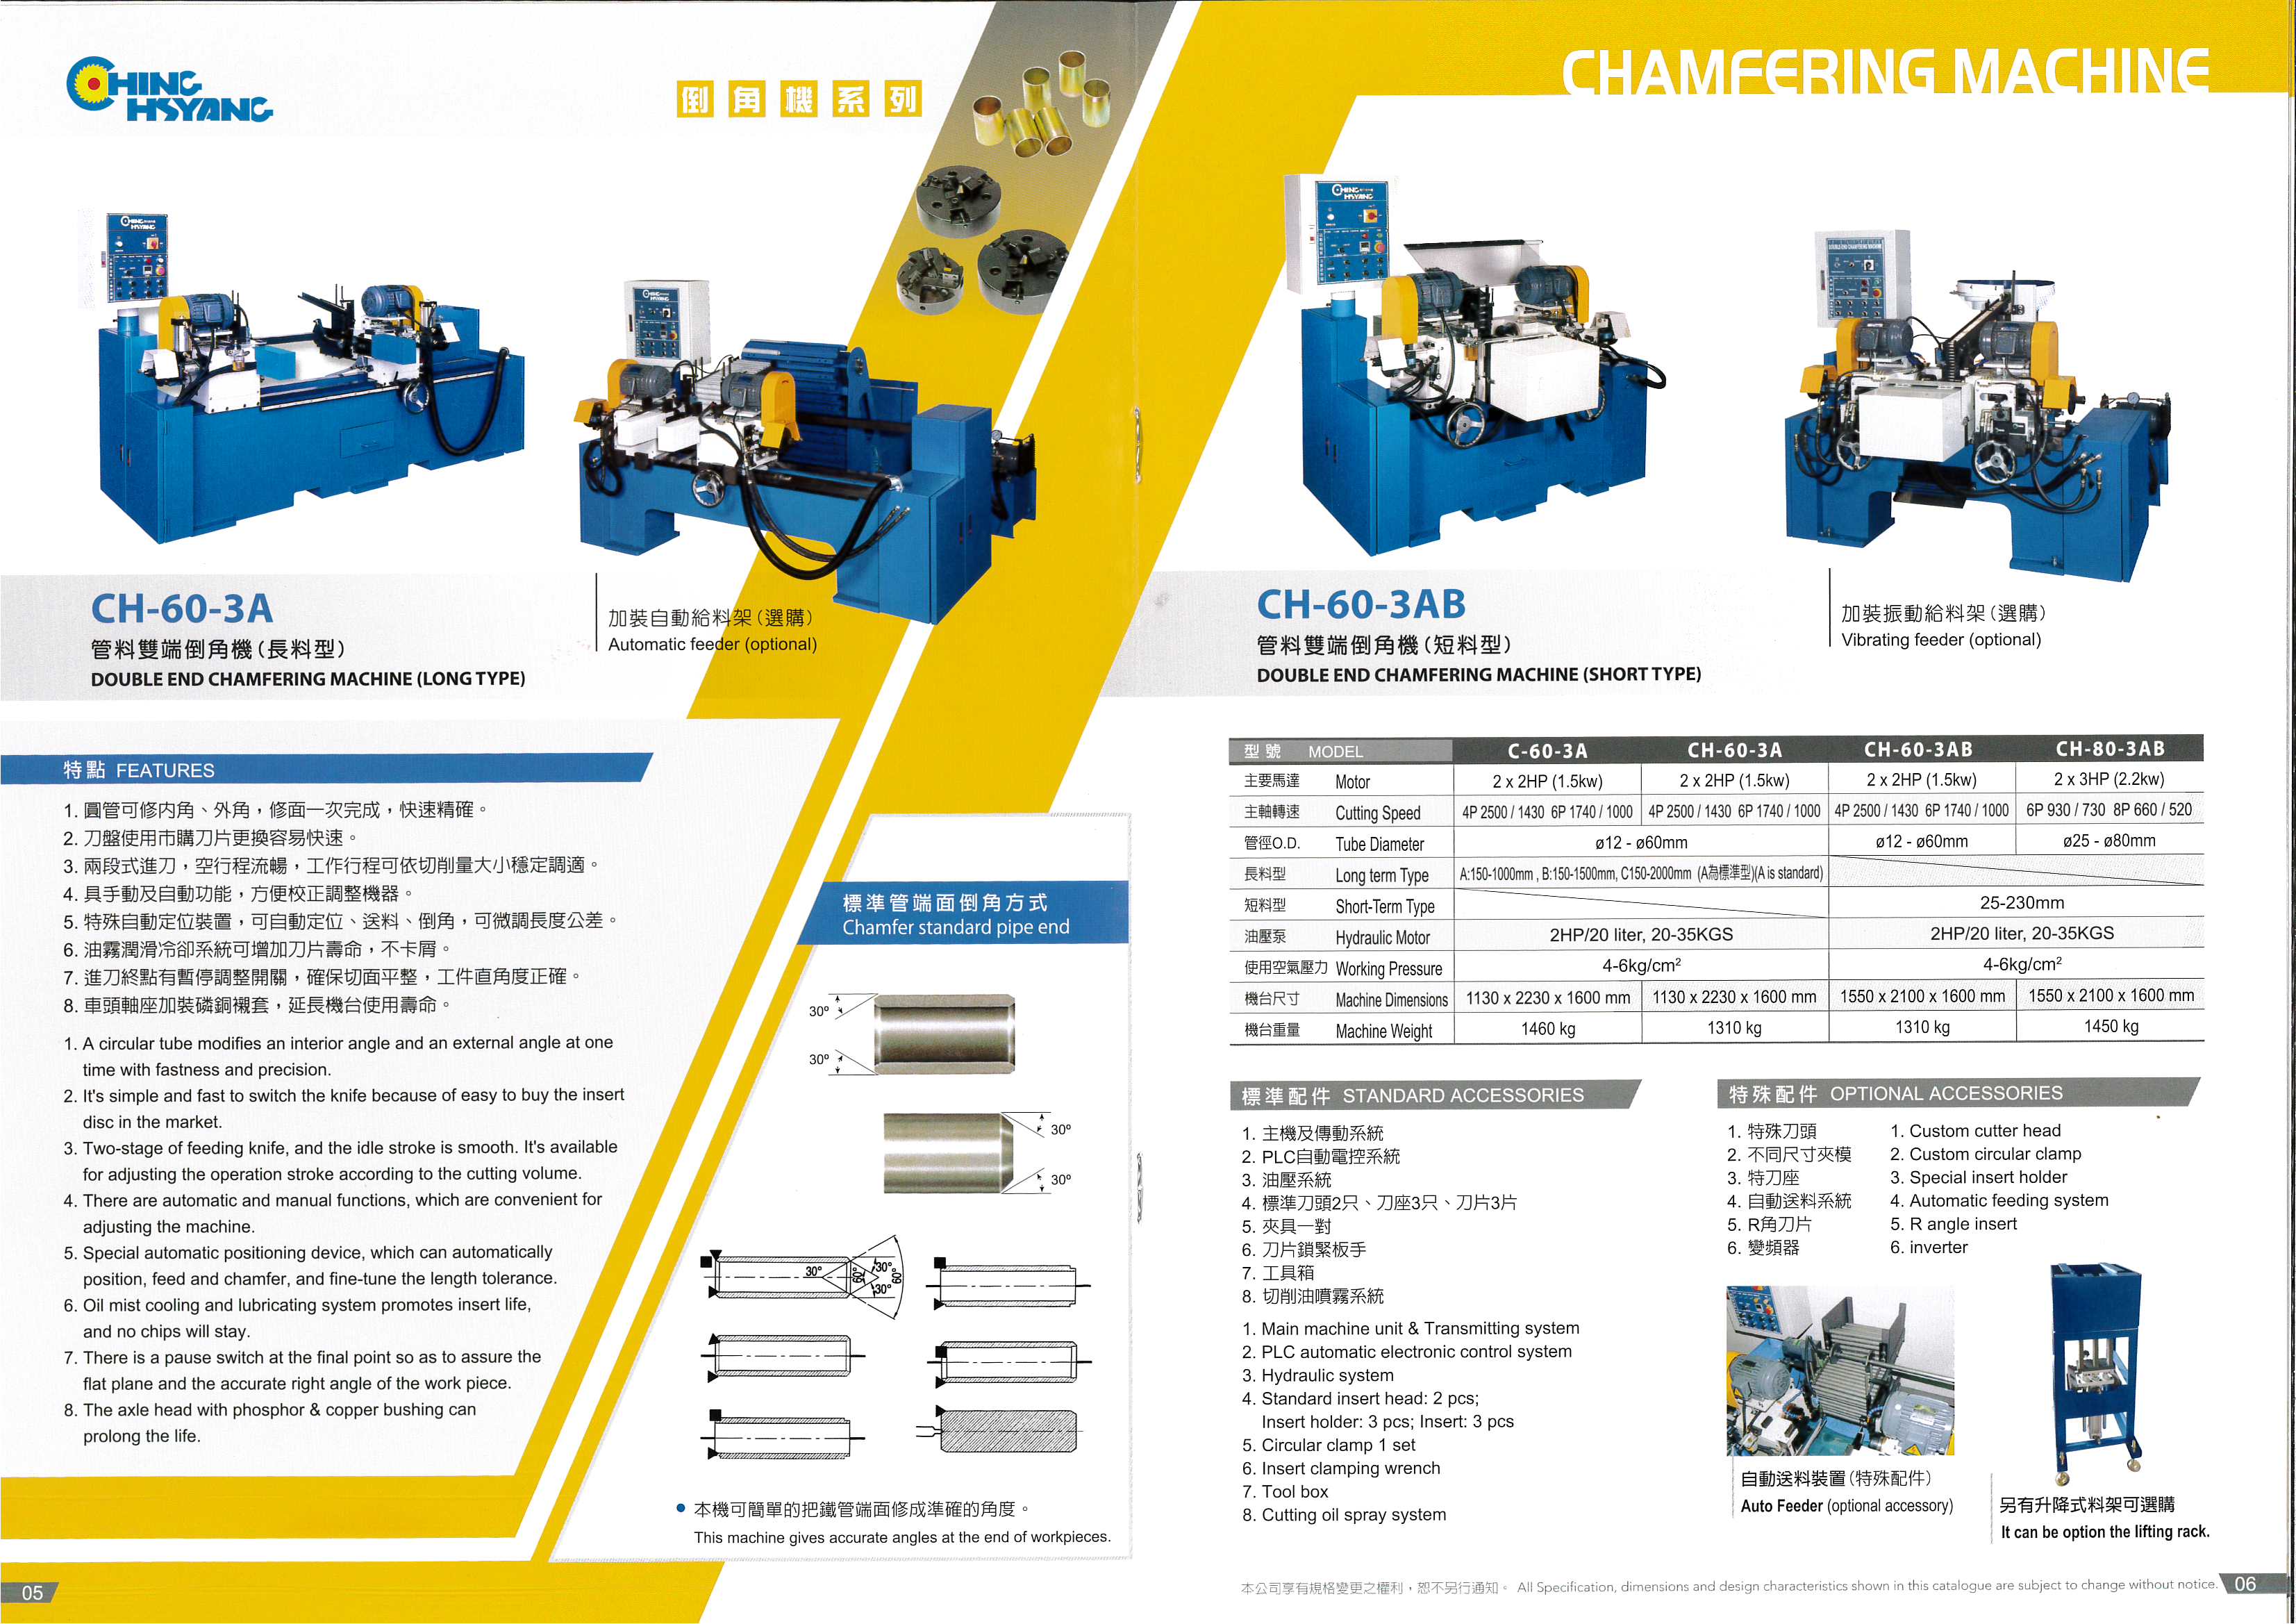 DOUBLE END CHAMFERING MACHINE-SHORT TYPE